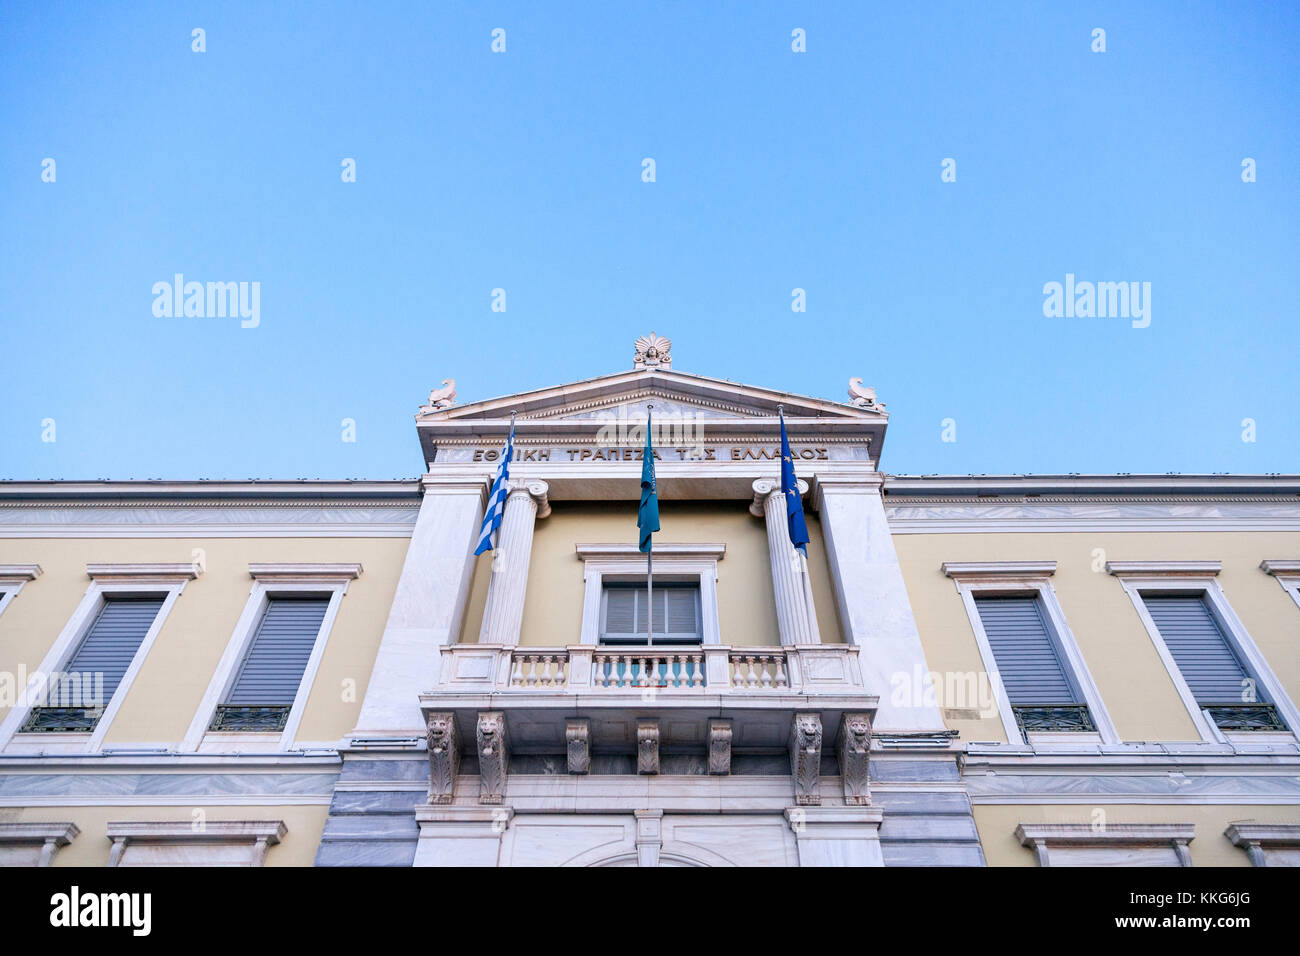 ATHENS, GREECE - NOVEMBER 4, 2017: Main entrance of the National Bank of Greece, the central bank of the country, at dusk. The bank is a key element t Stock Photo